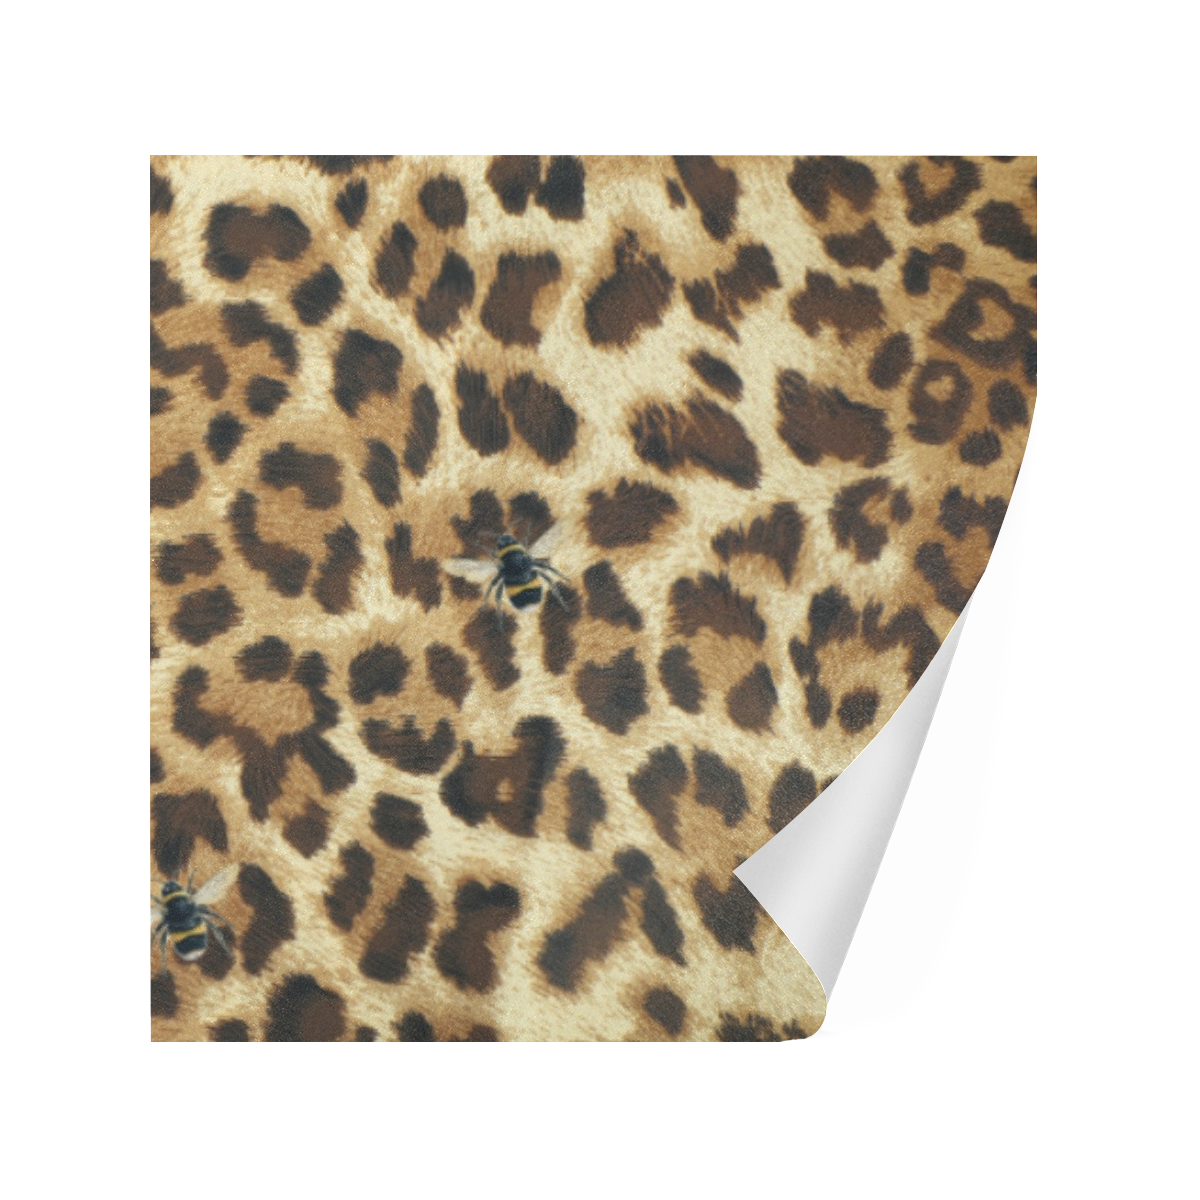 Buzz Leopard Gift Wrapping Paper 58"x 23" (5 Rolls)